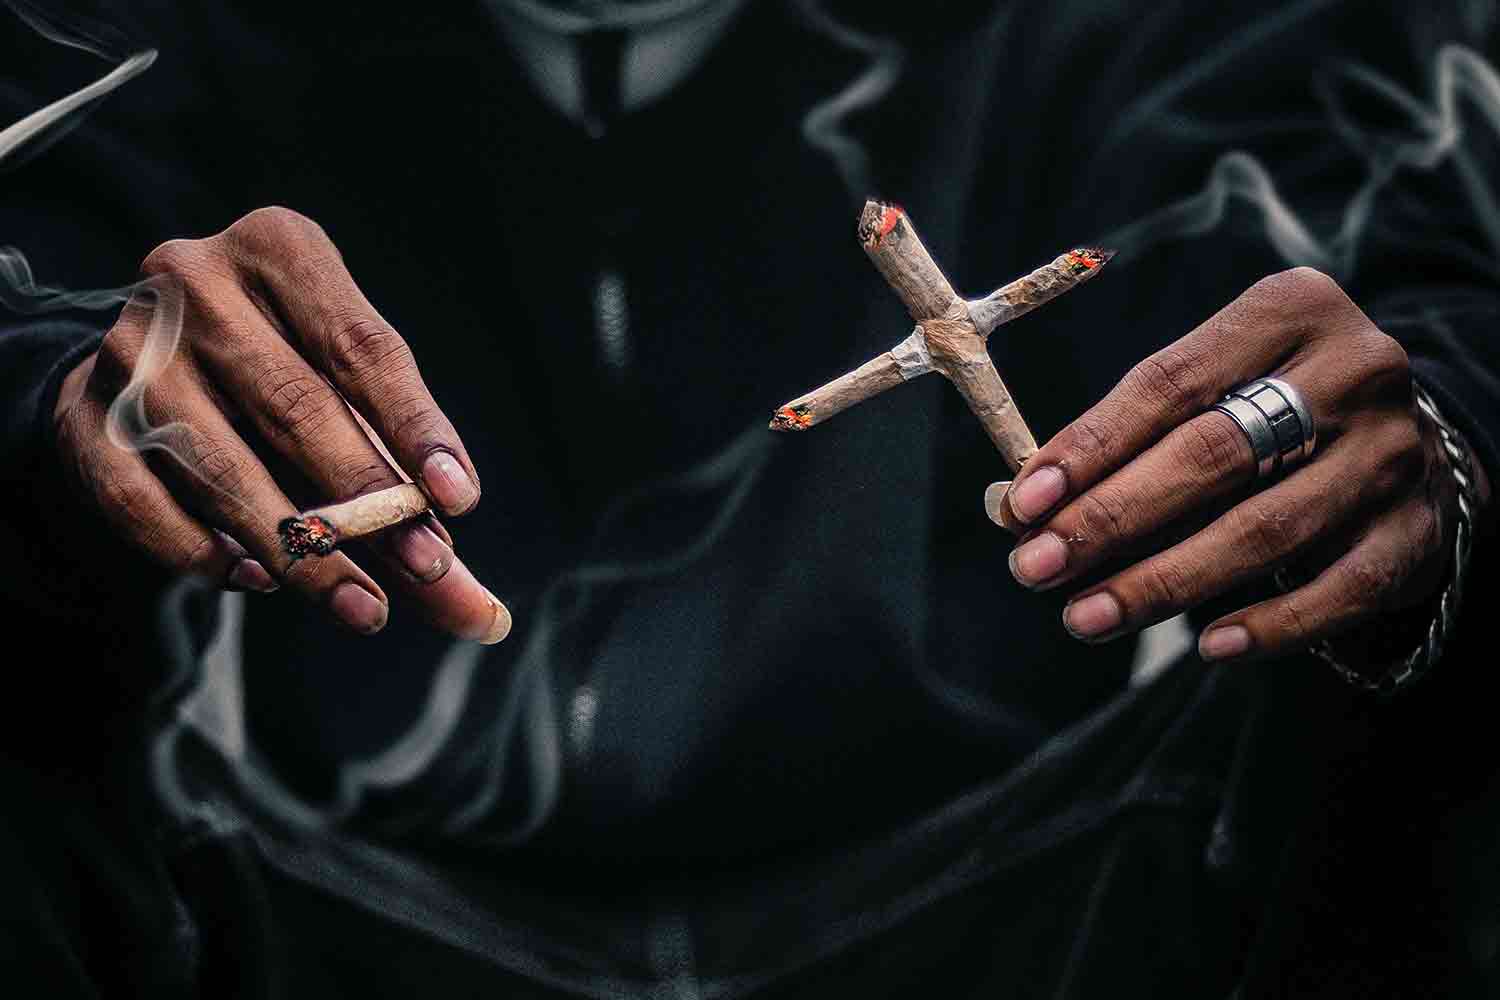 how to roll a cross joint